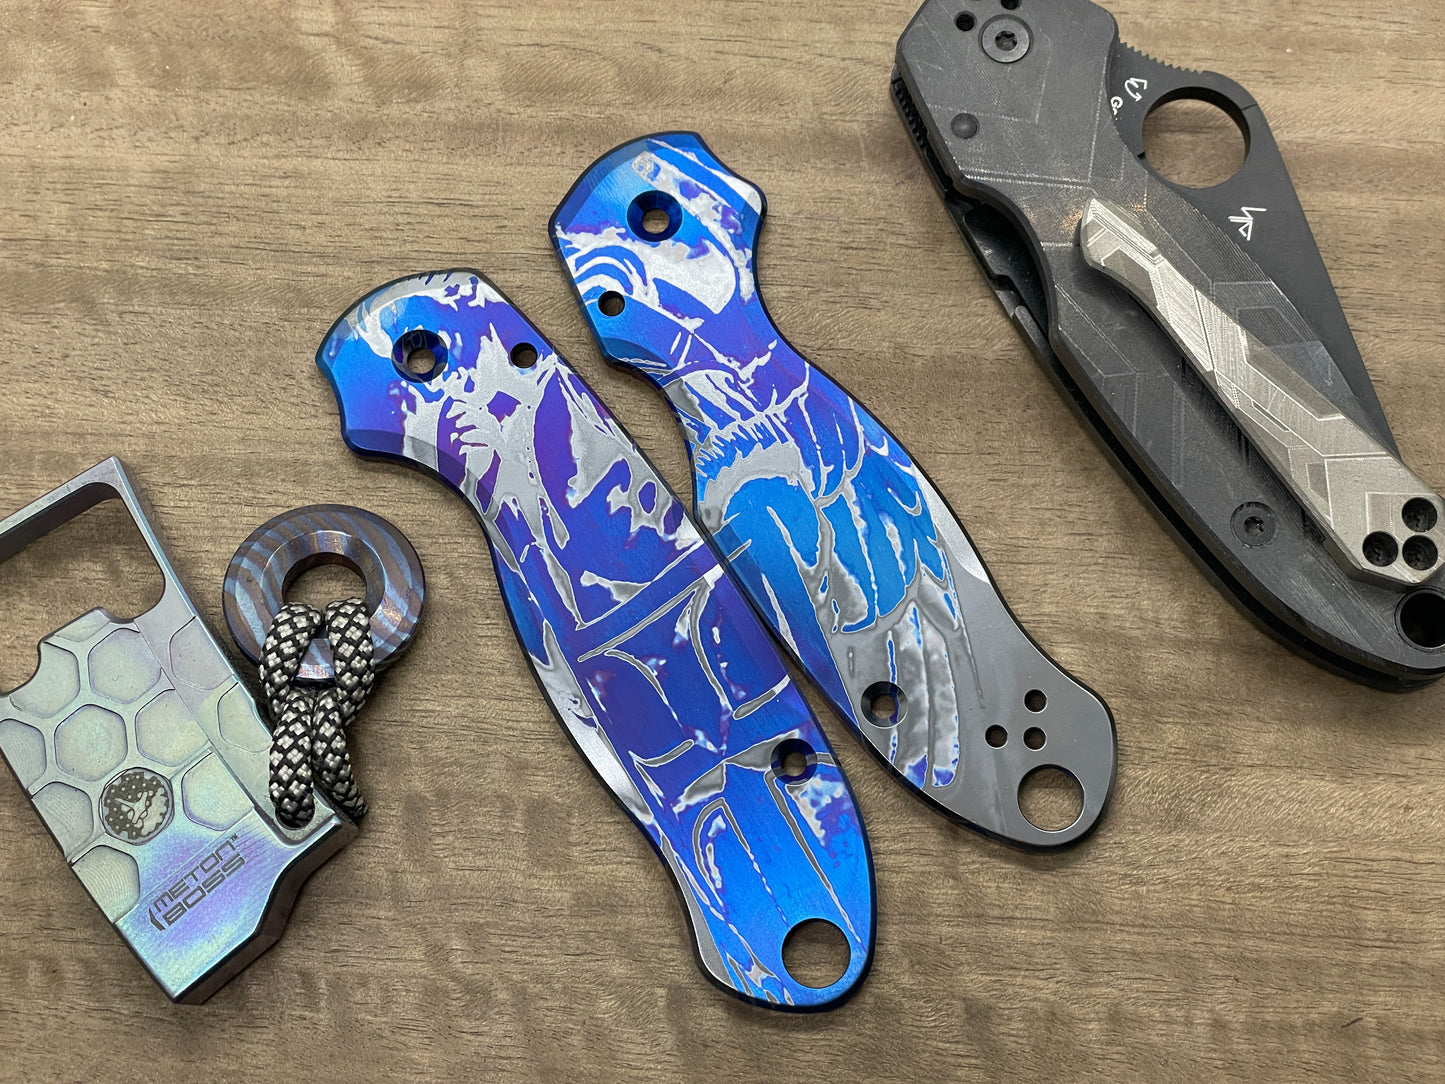 ST. MICHAEL Heat ano Flamed Titanium Scales for Spyderco Para 3